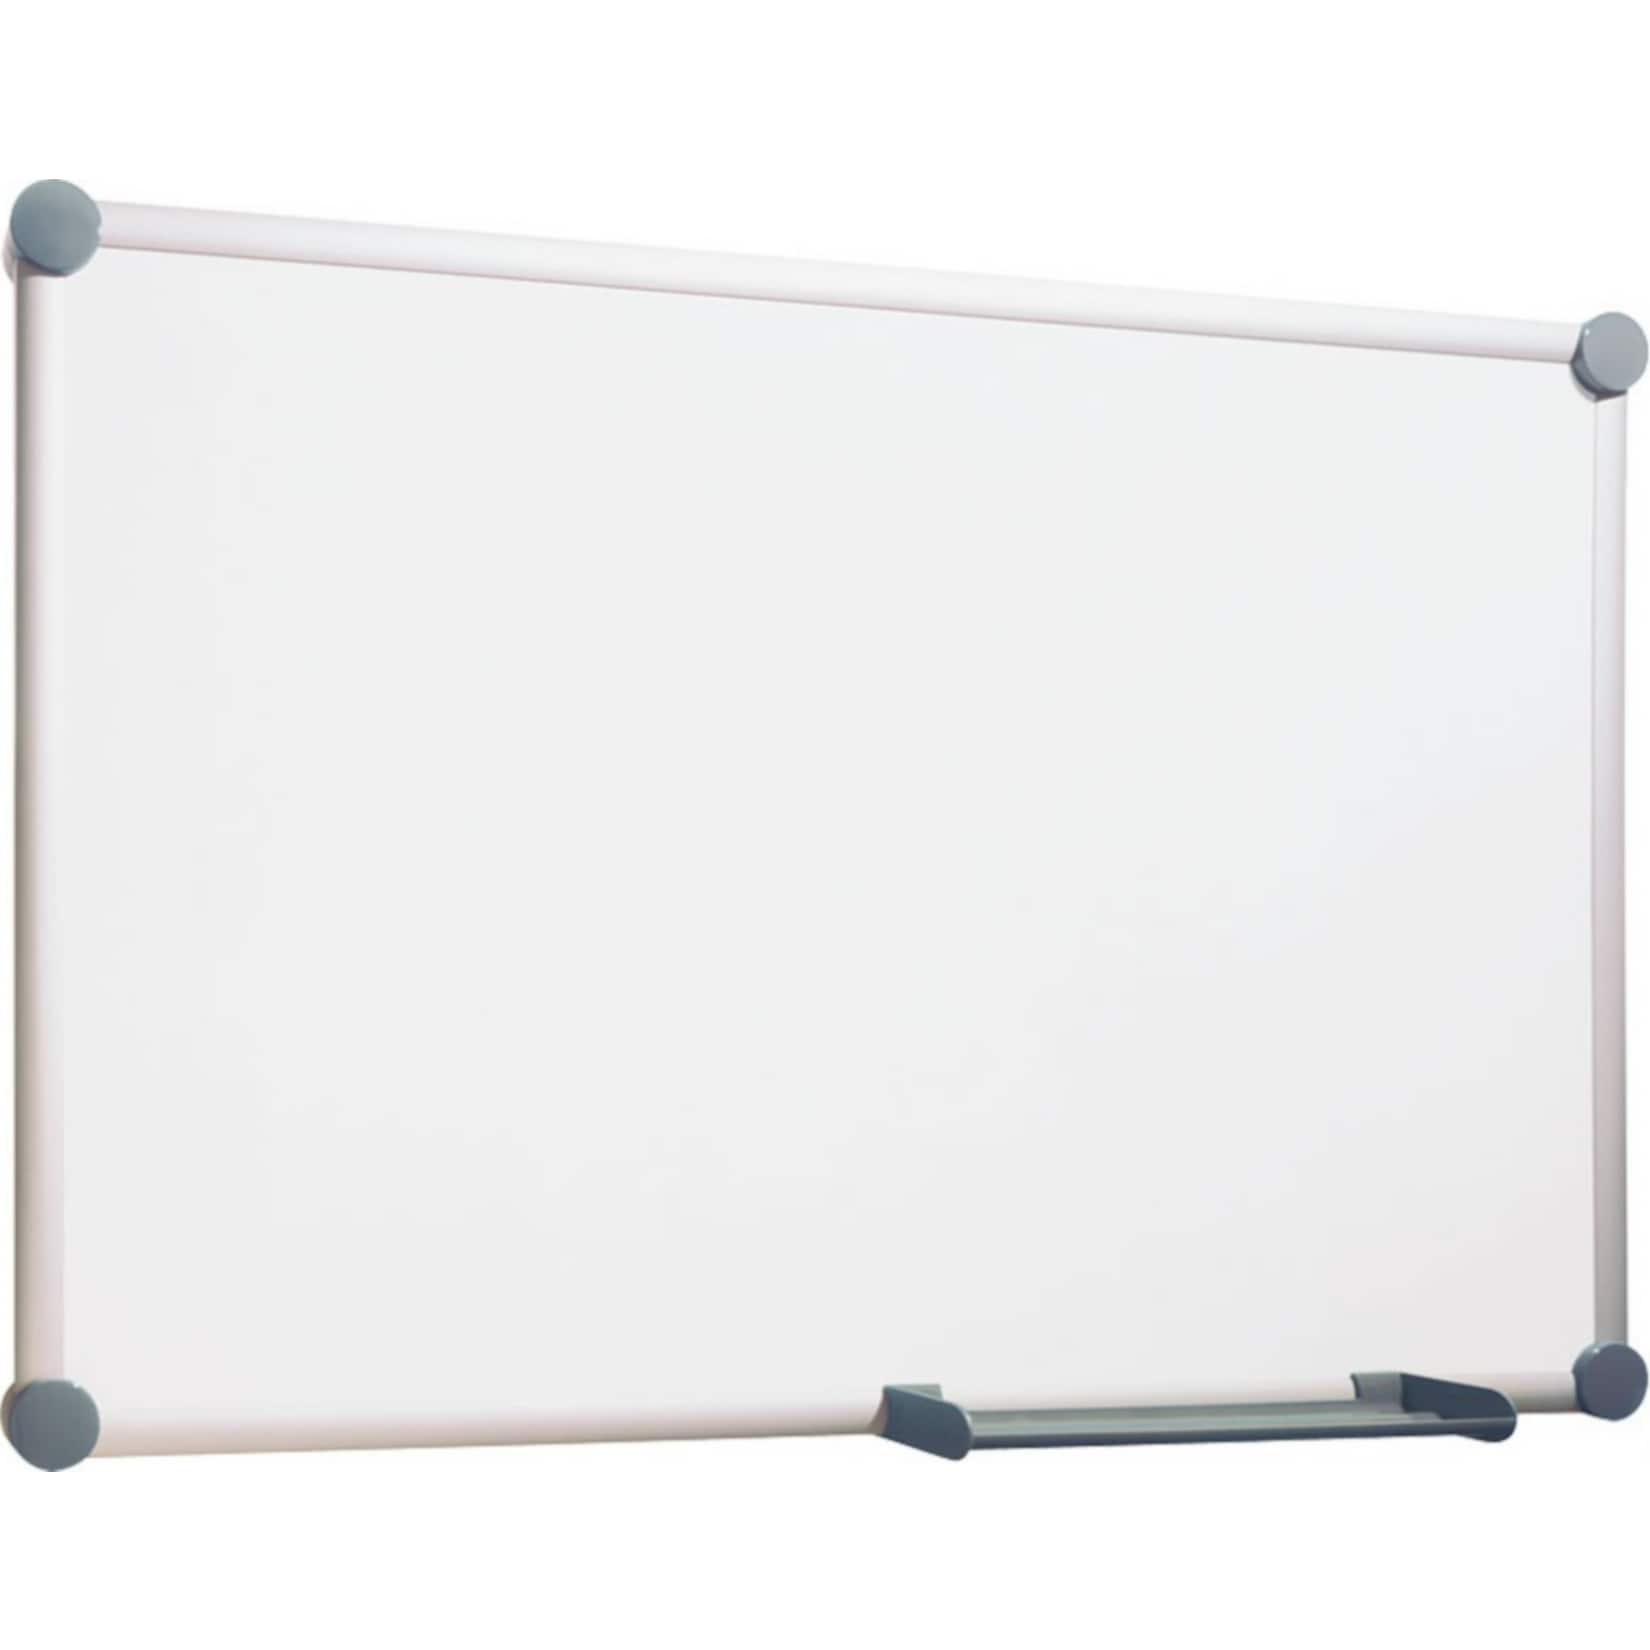 MAUL Whiteboard 2000 MAULpro 90 x 120 cm - Emaille